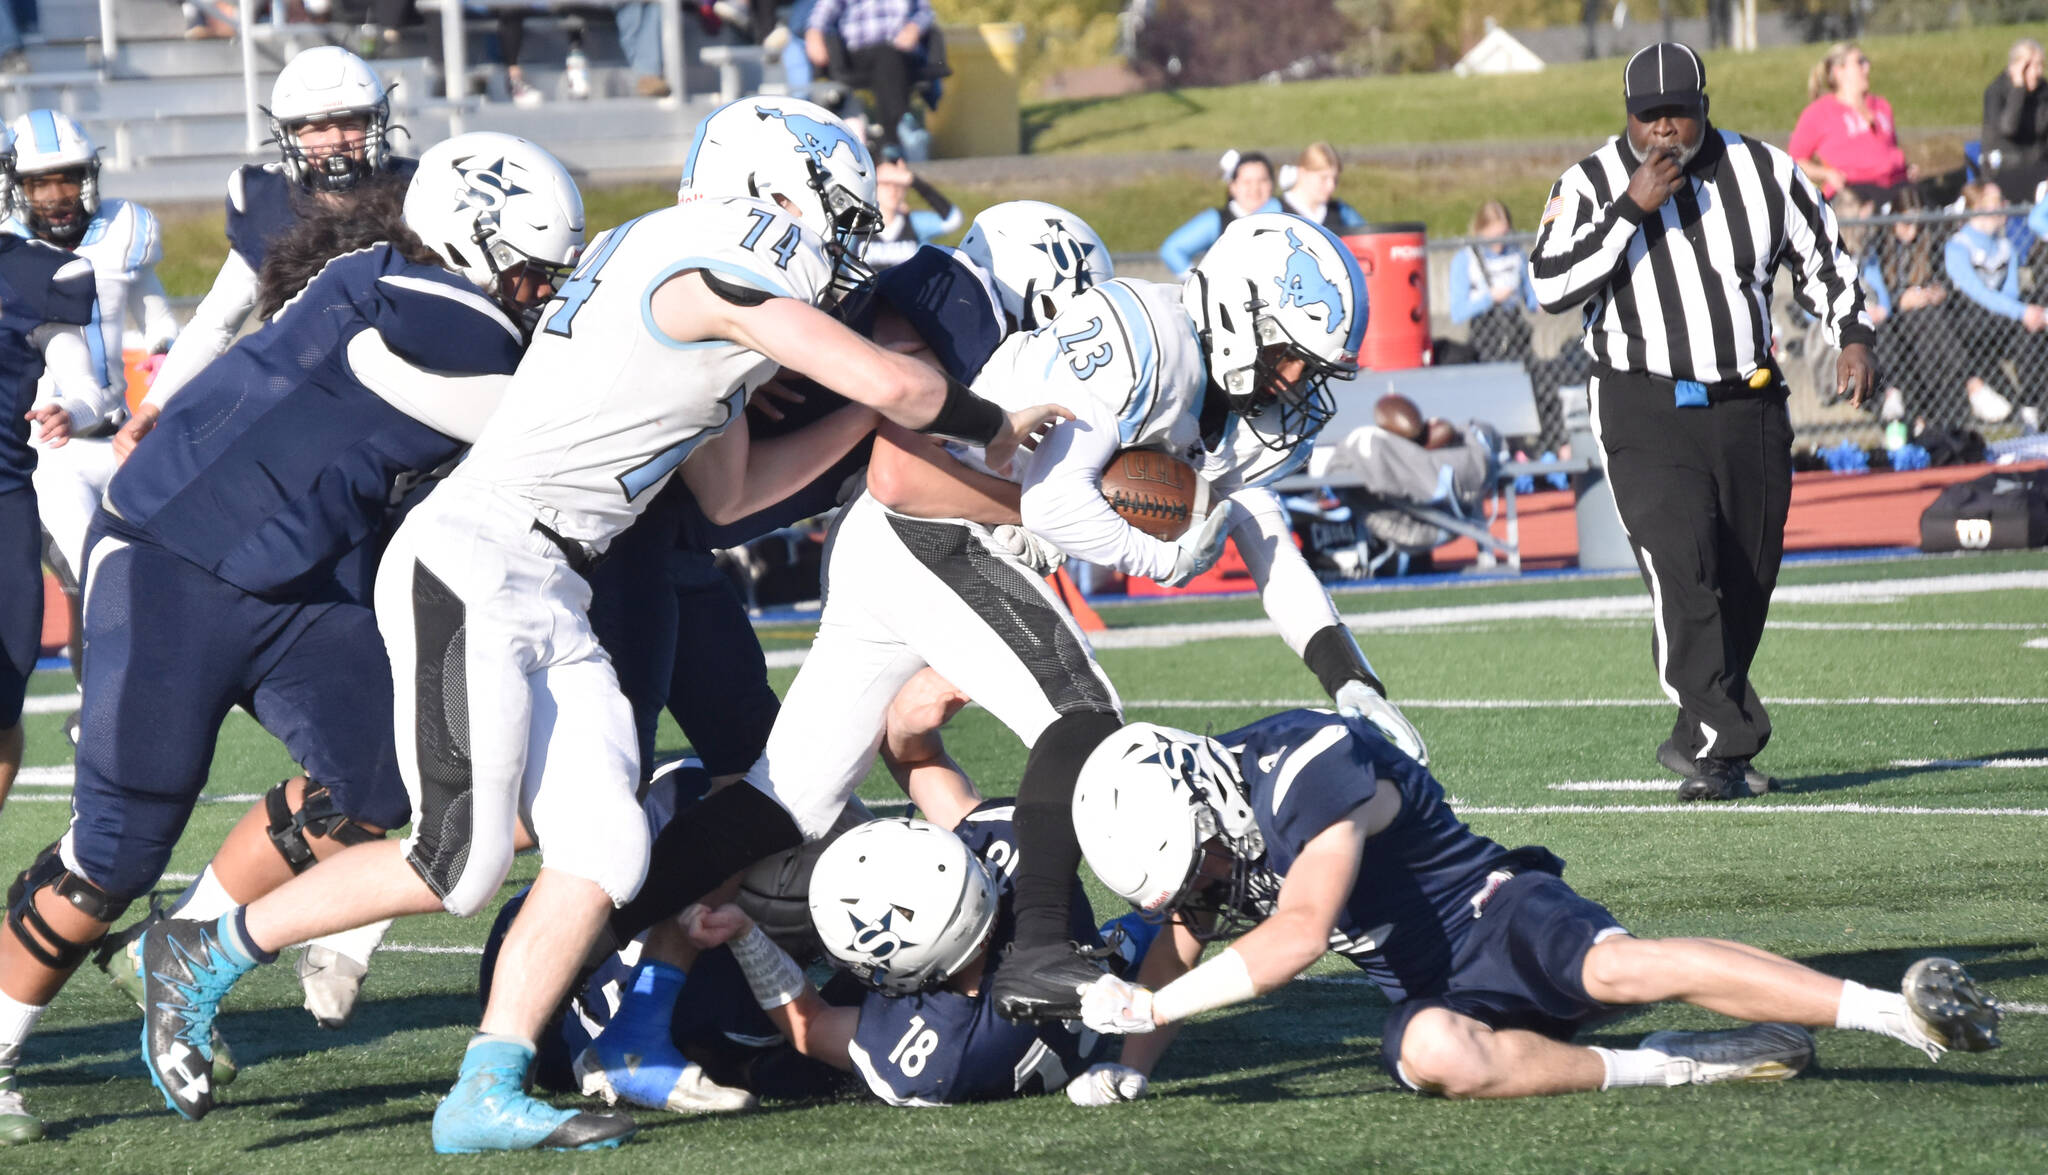 The Soldotna defense teams up to bring down Chugiak’s Tyson Billman on Friday, Sept. 22, 2023, at Justin Maile Field at Soldotna High School in Soldotna, Alaska. (Photo by Jeff Helminiak/Peninsula Clarion)